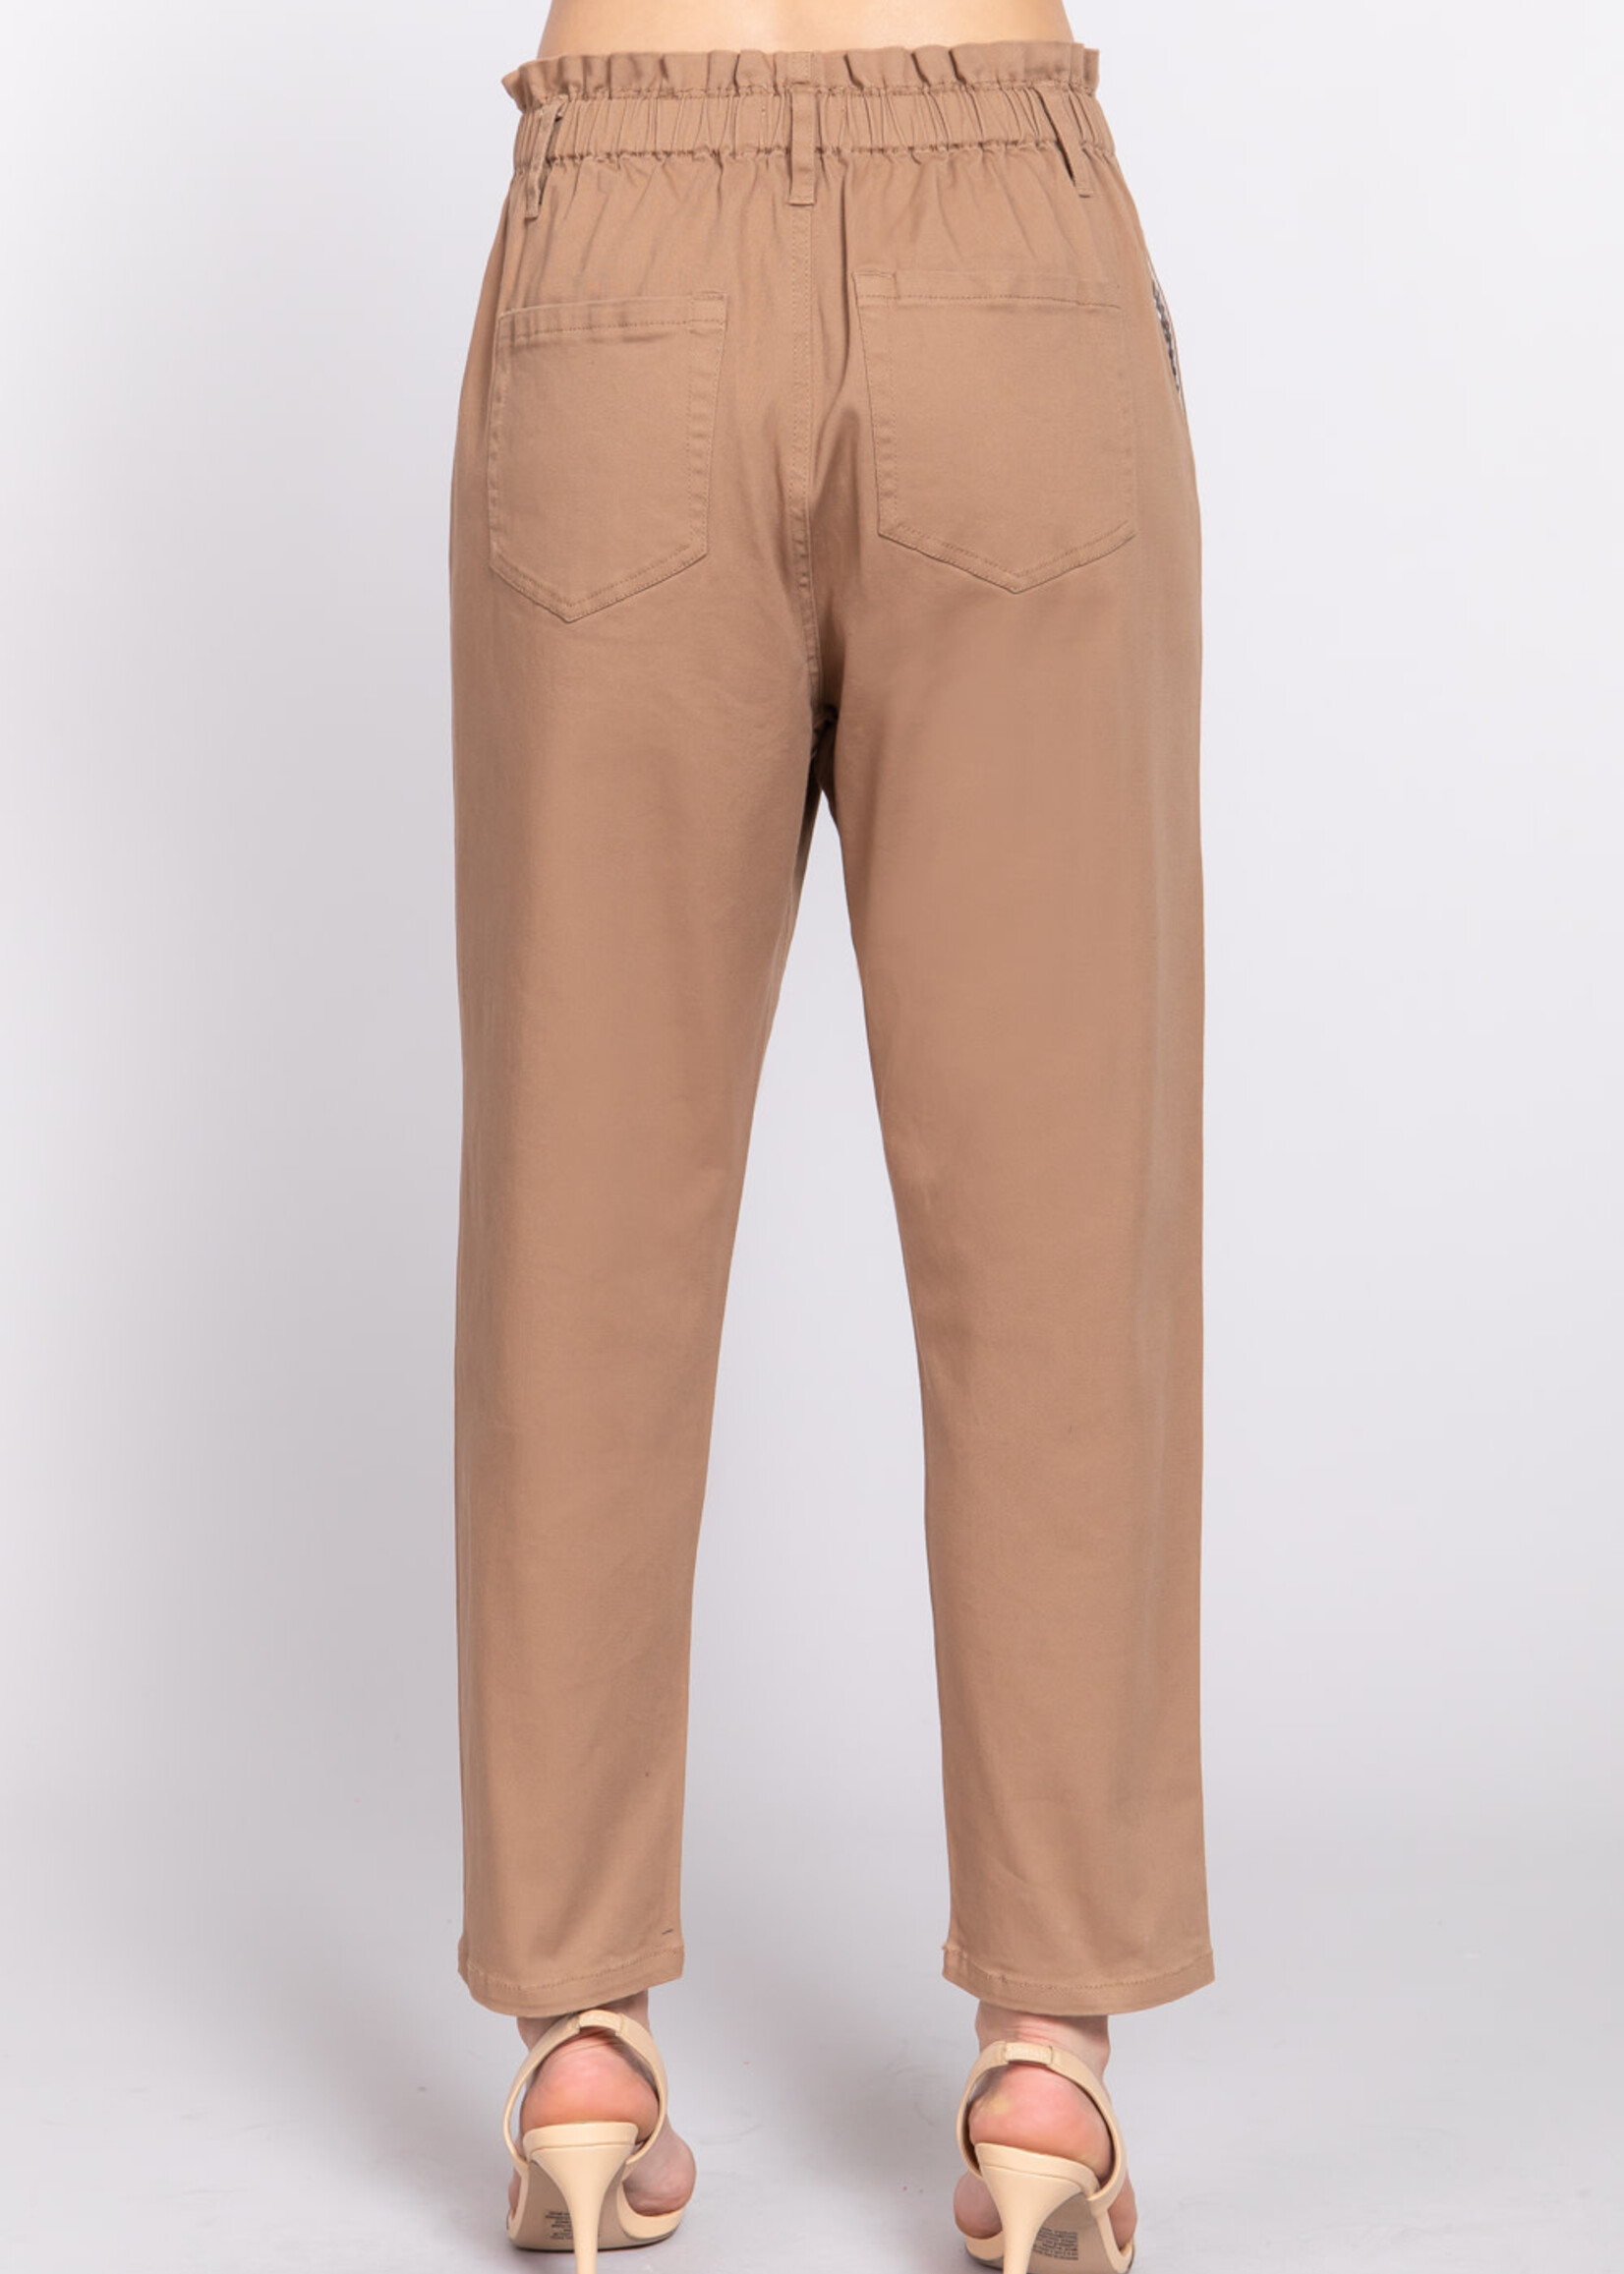 Kirkland Signature Men's 5 Pocket Brushed Cotton Twill Pants - New With  Tags | eBay